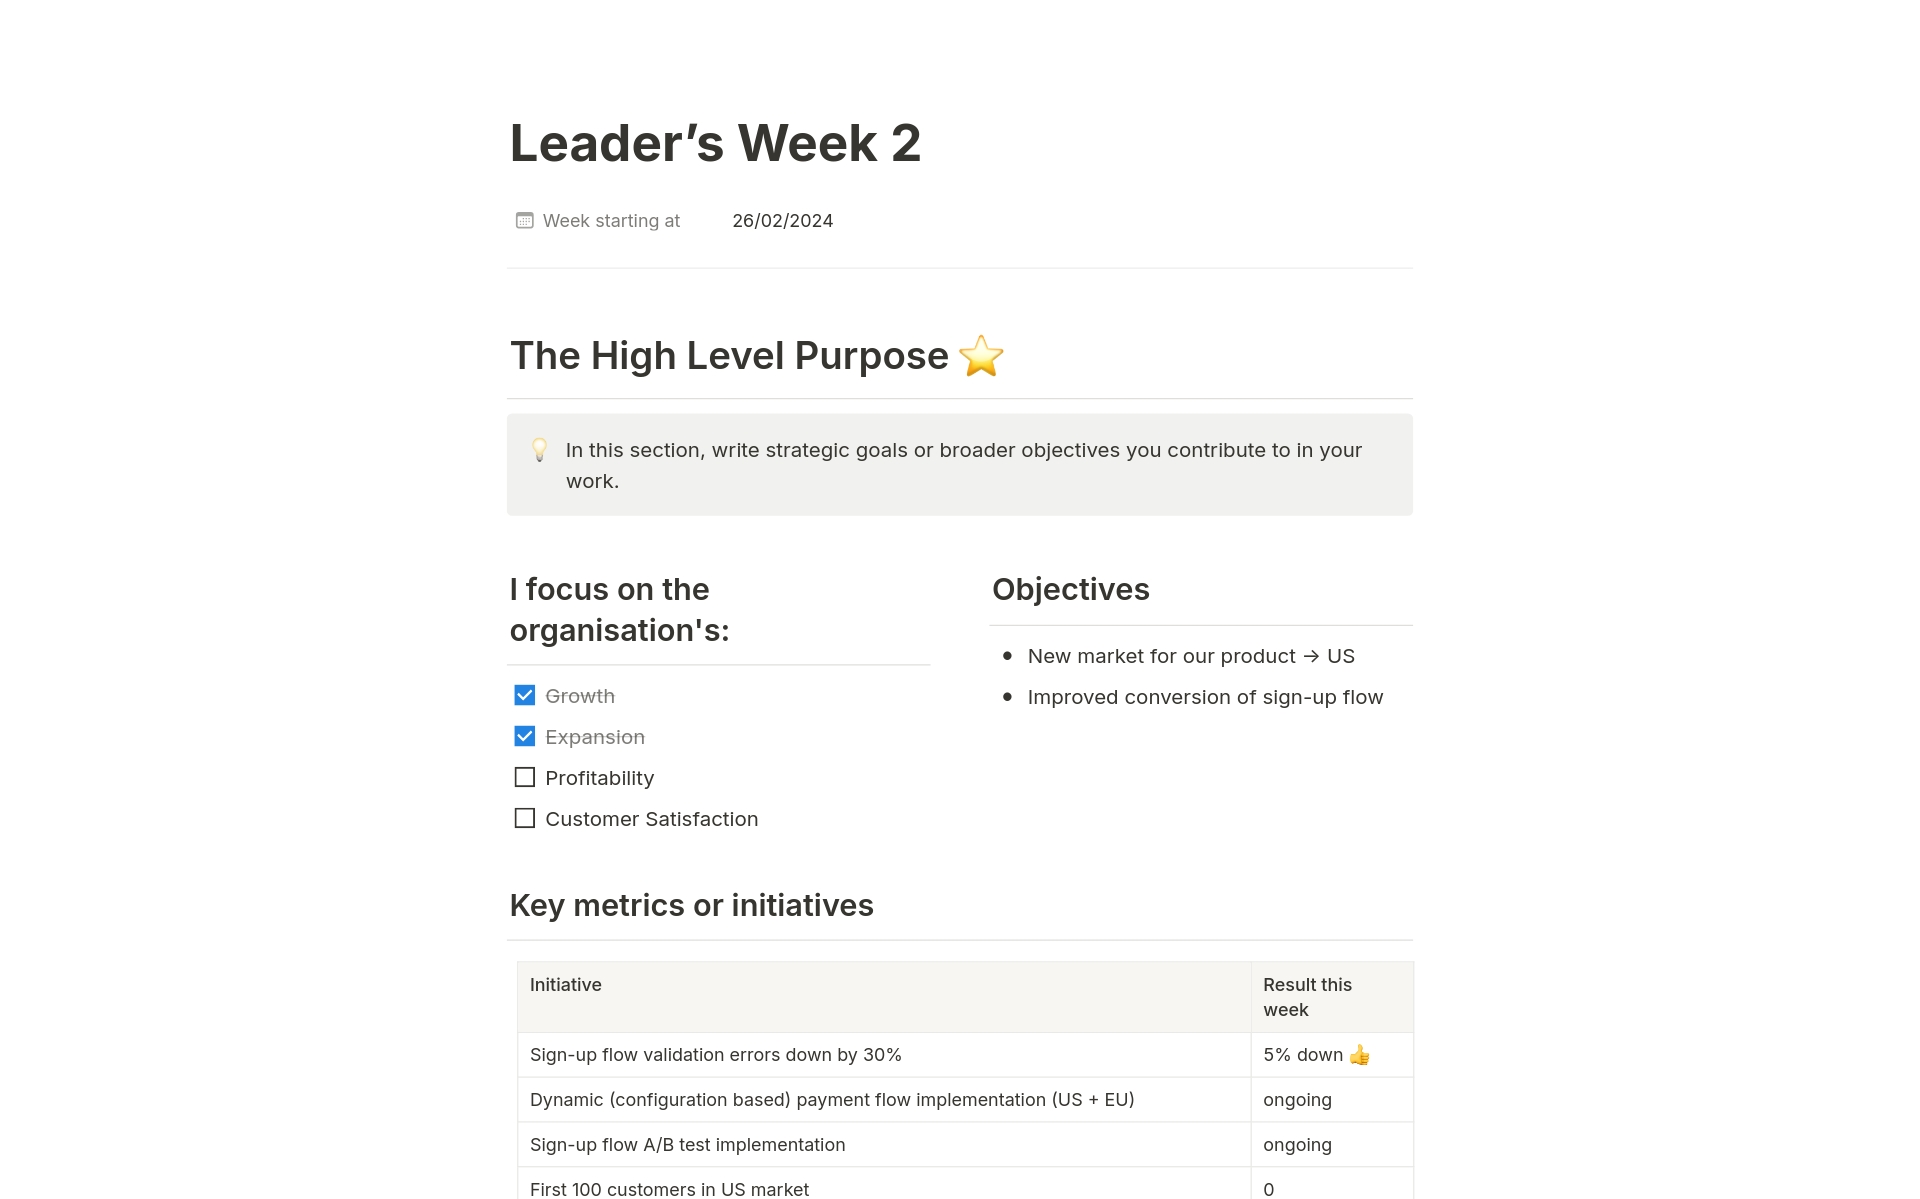 Engineering Leader’s Week - How to Maximize Your Weekly Impact